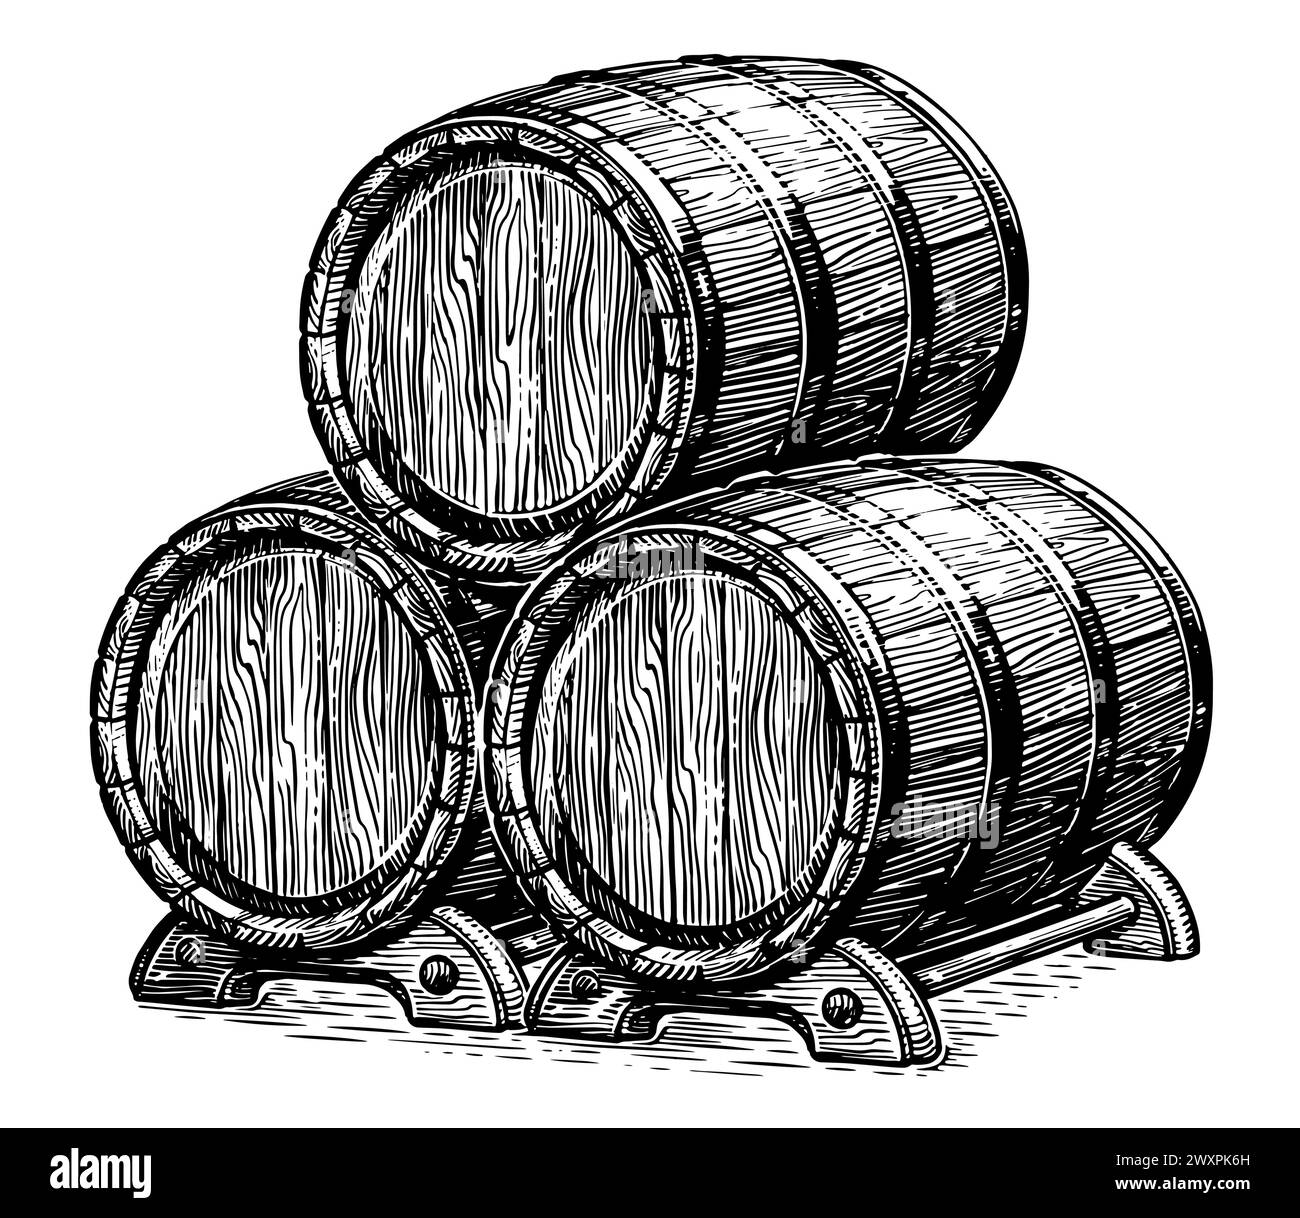 Three oak barrels for alcoholic beverages. Wood kegs with wine or beer. Hand drawn engraving style illustration Stock Vector